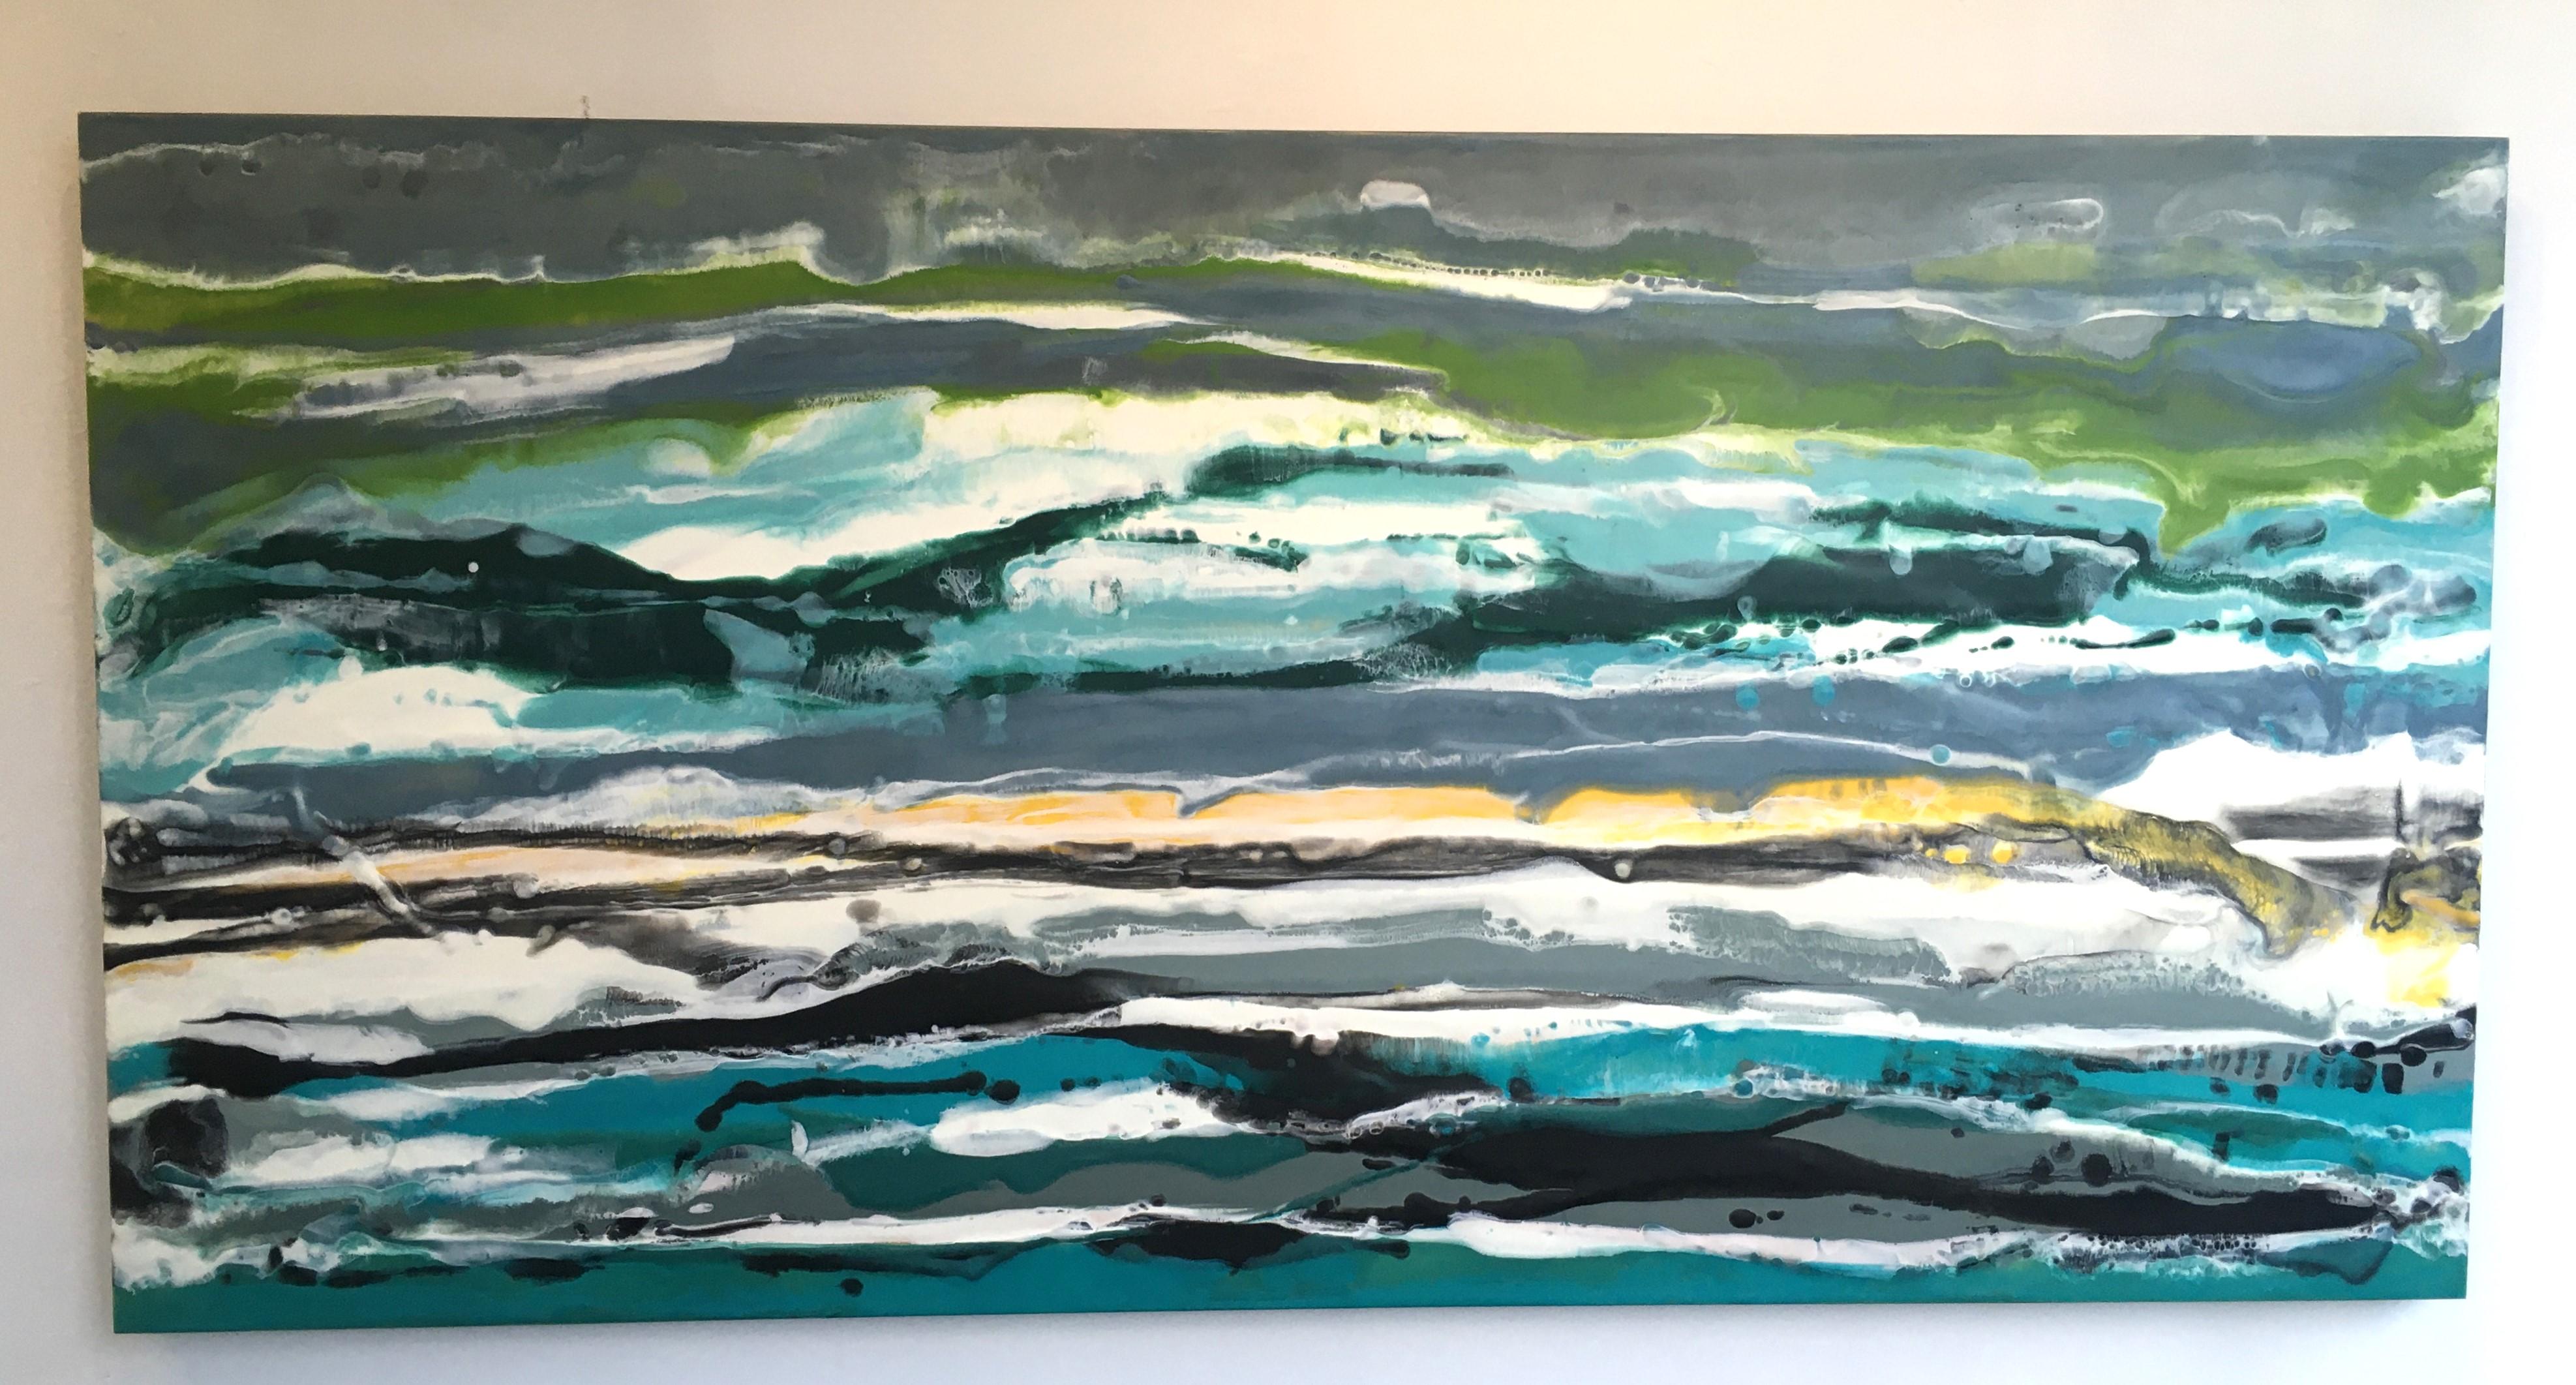 Lac Como, Abstract, Landscape, Yellow, Green, Blue, Encaustic, Horizontal - Painting by Marie Danielle Leblanc